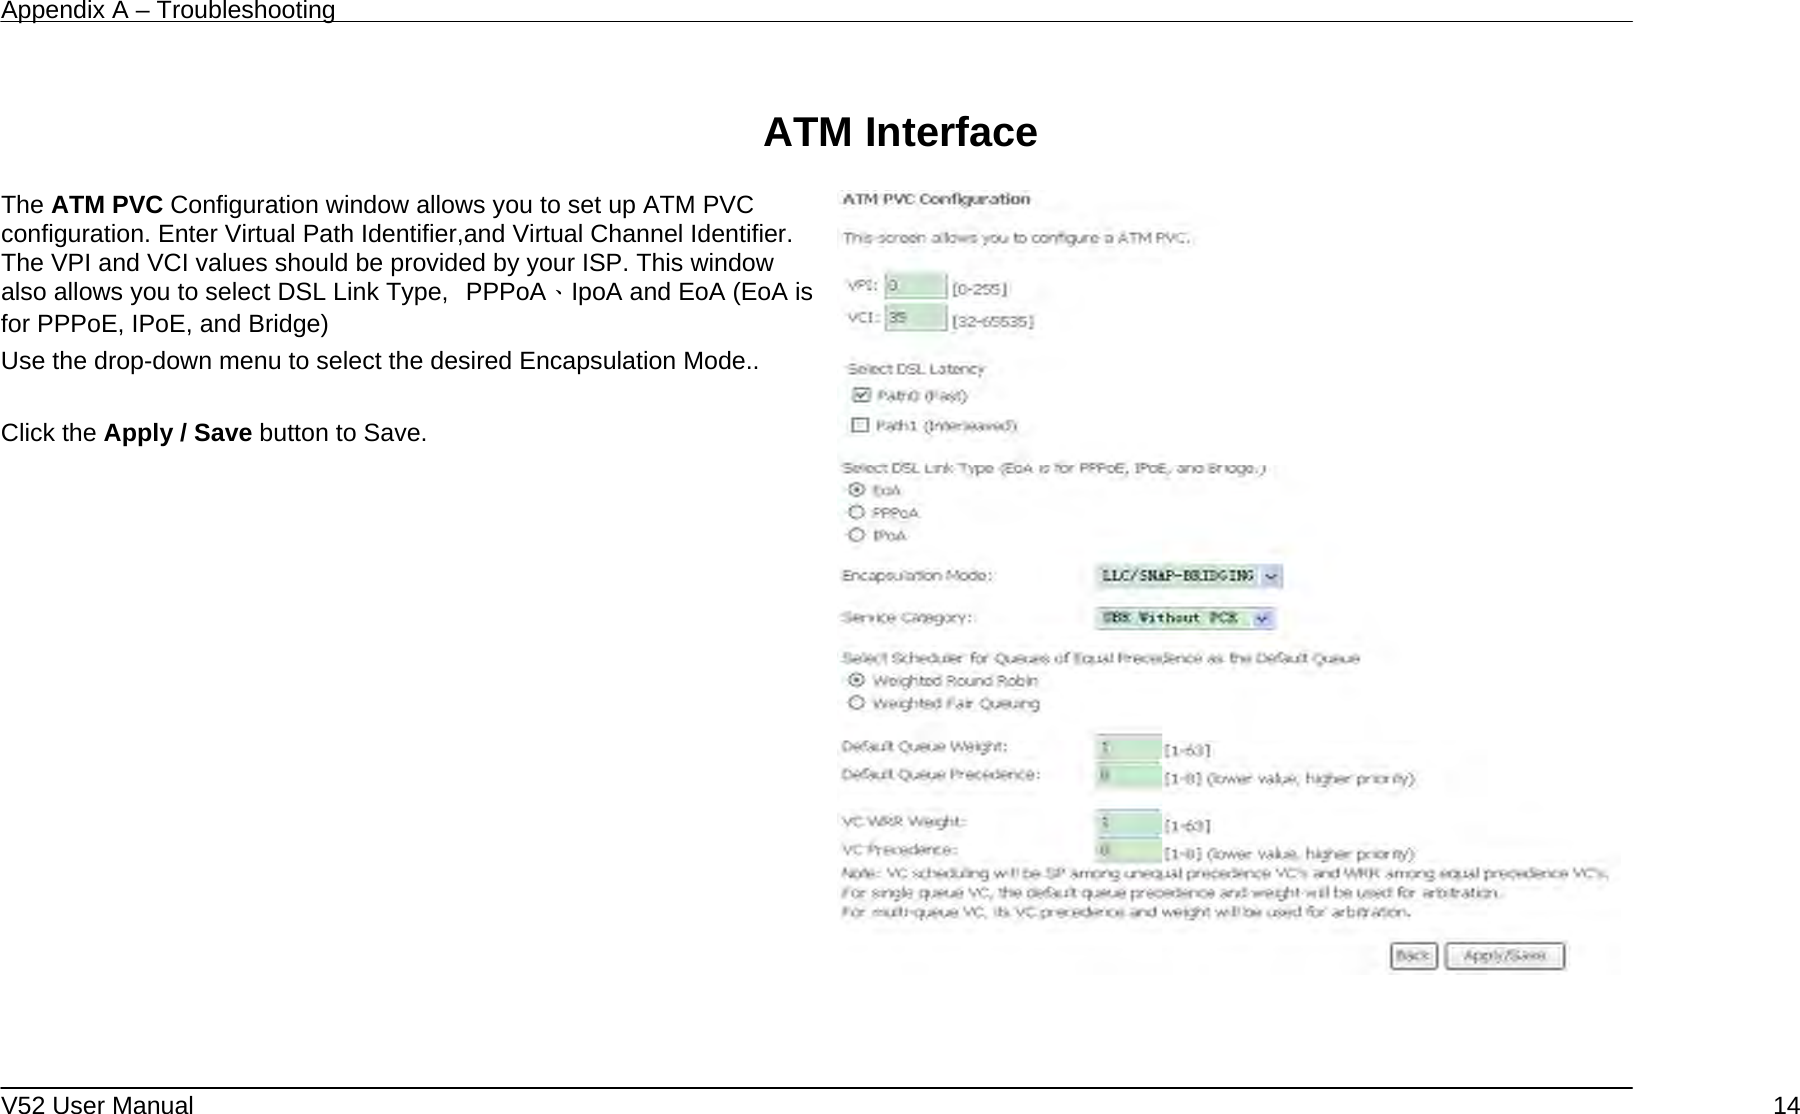 Appendix A – Troubleshooting   V52 User Manual    14 ATM Interface           The ATM PVC Configuration window allows you to set up ATM PVC configuration. Enter Virtual Path Identifier,and Virtual Channel Identifier. The VPI and VCI values should be provided by your ISP. This window also allows you to select DSL Link Type,  PPPoA、IpoA and EoA (EoA is for PPPoE, IPoE, and Bridge) Use the drop-down menu to select the desired Encapsulation Mode..  Click the Apply / Save button to Save.       